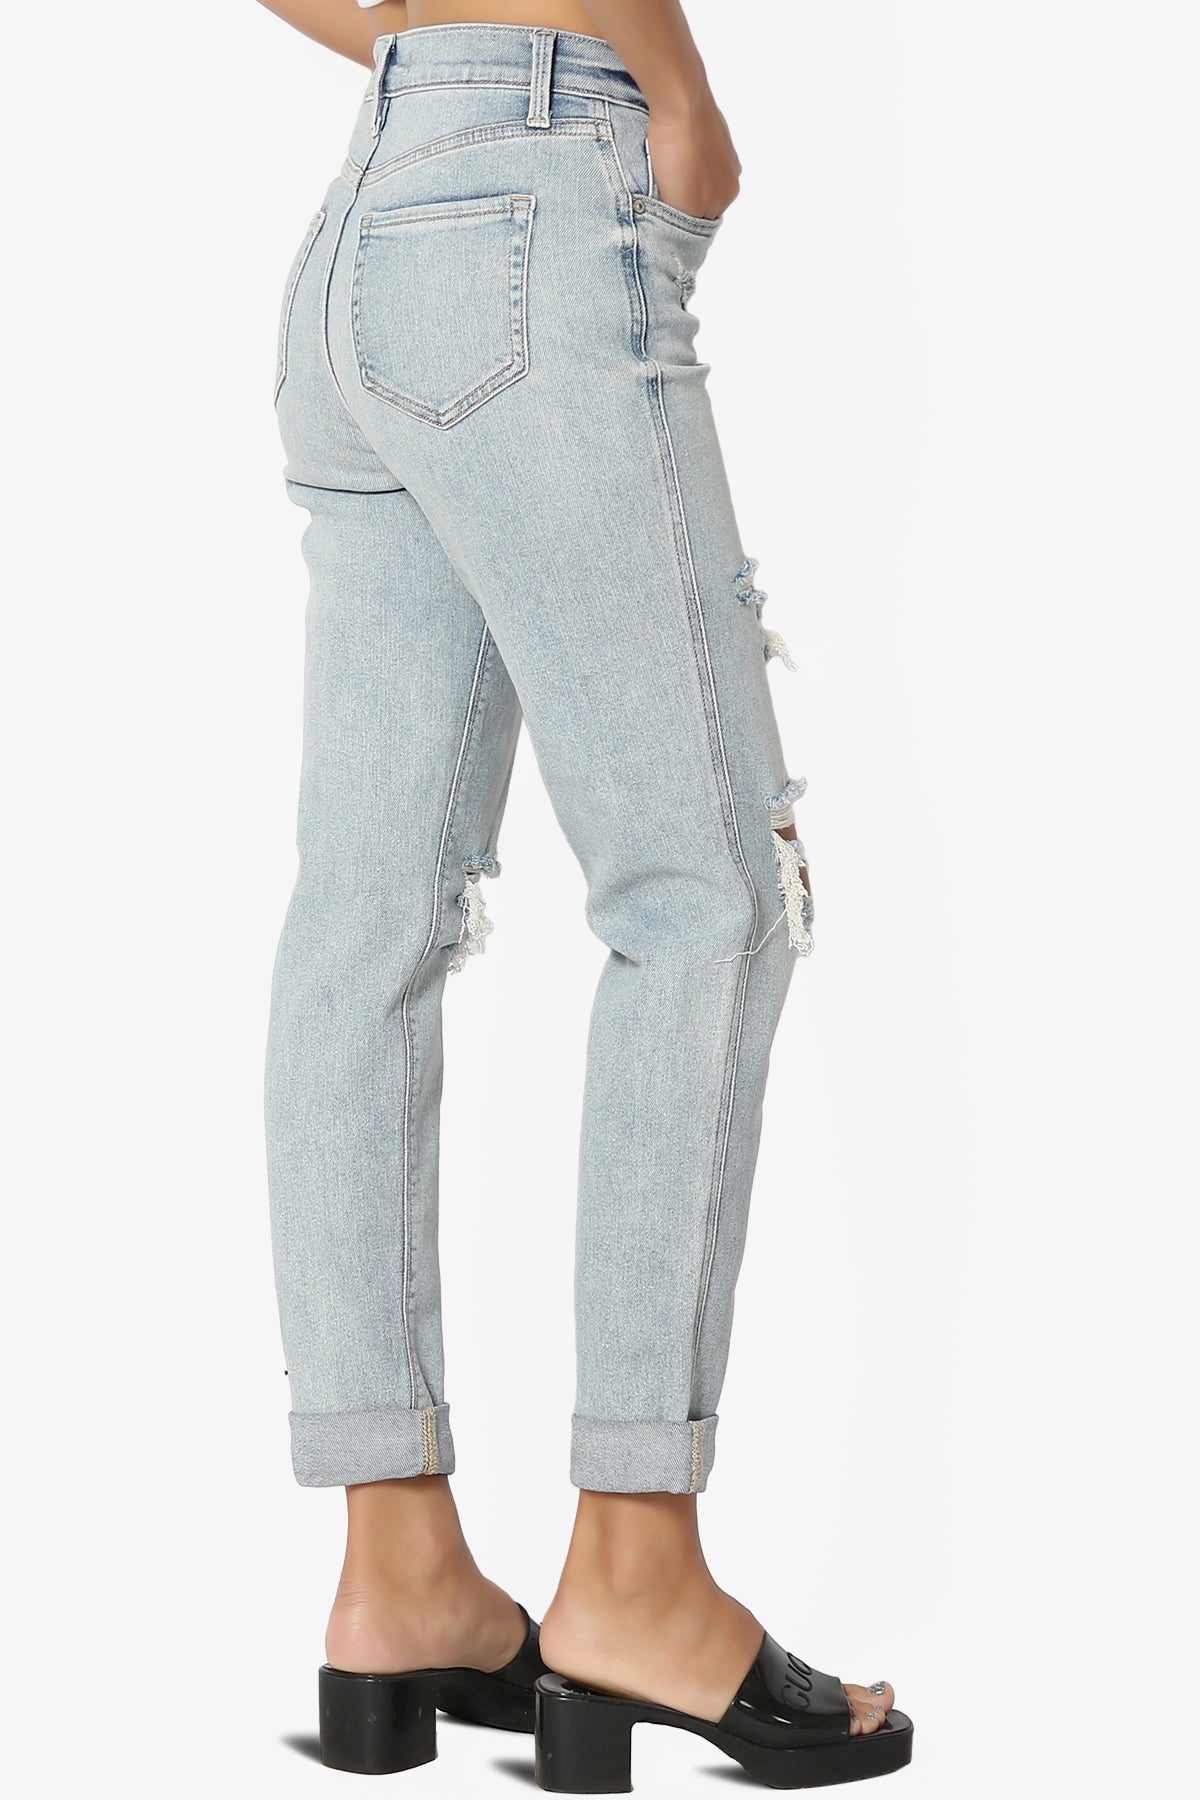 Rocky High Rise Distressed Boyfriend Jeans in ICMP LIGHT_4